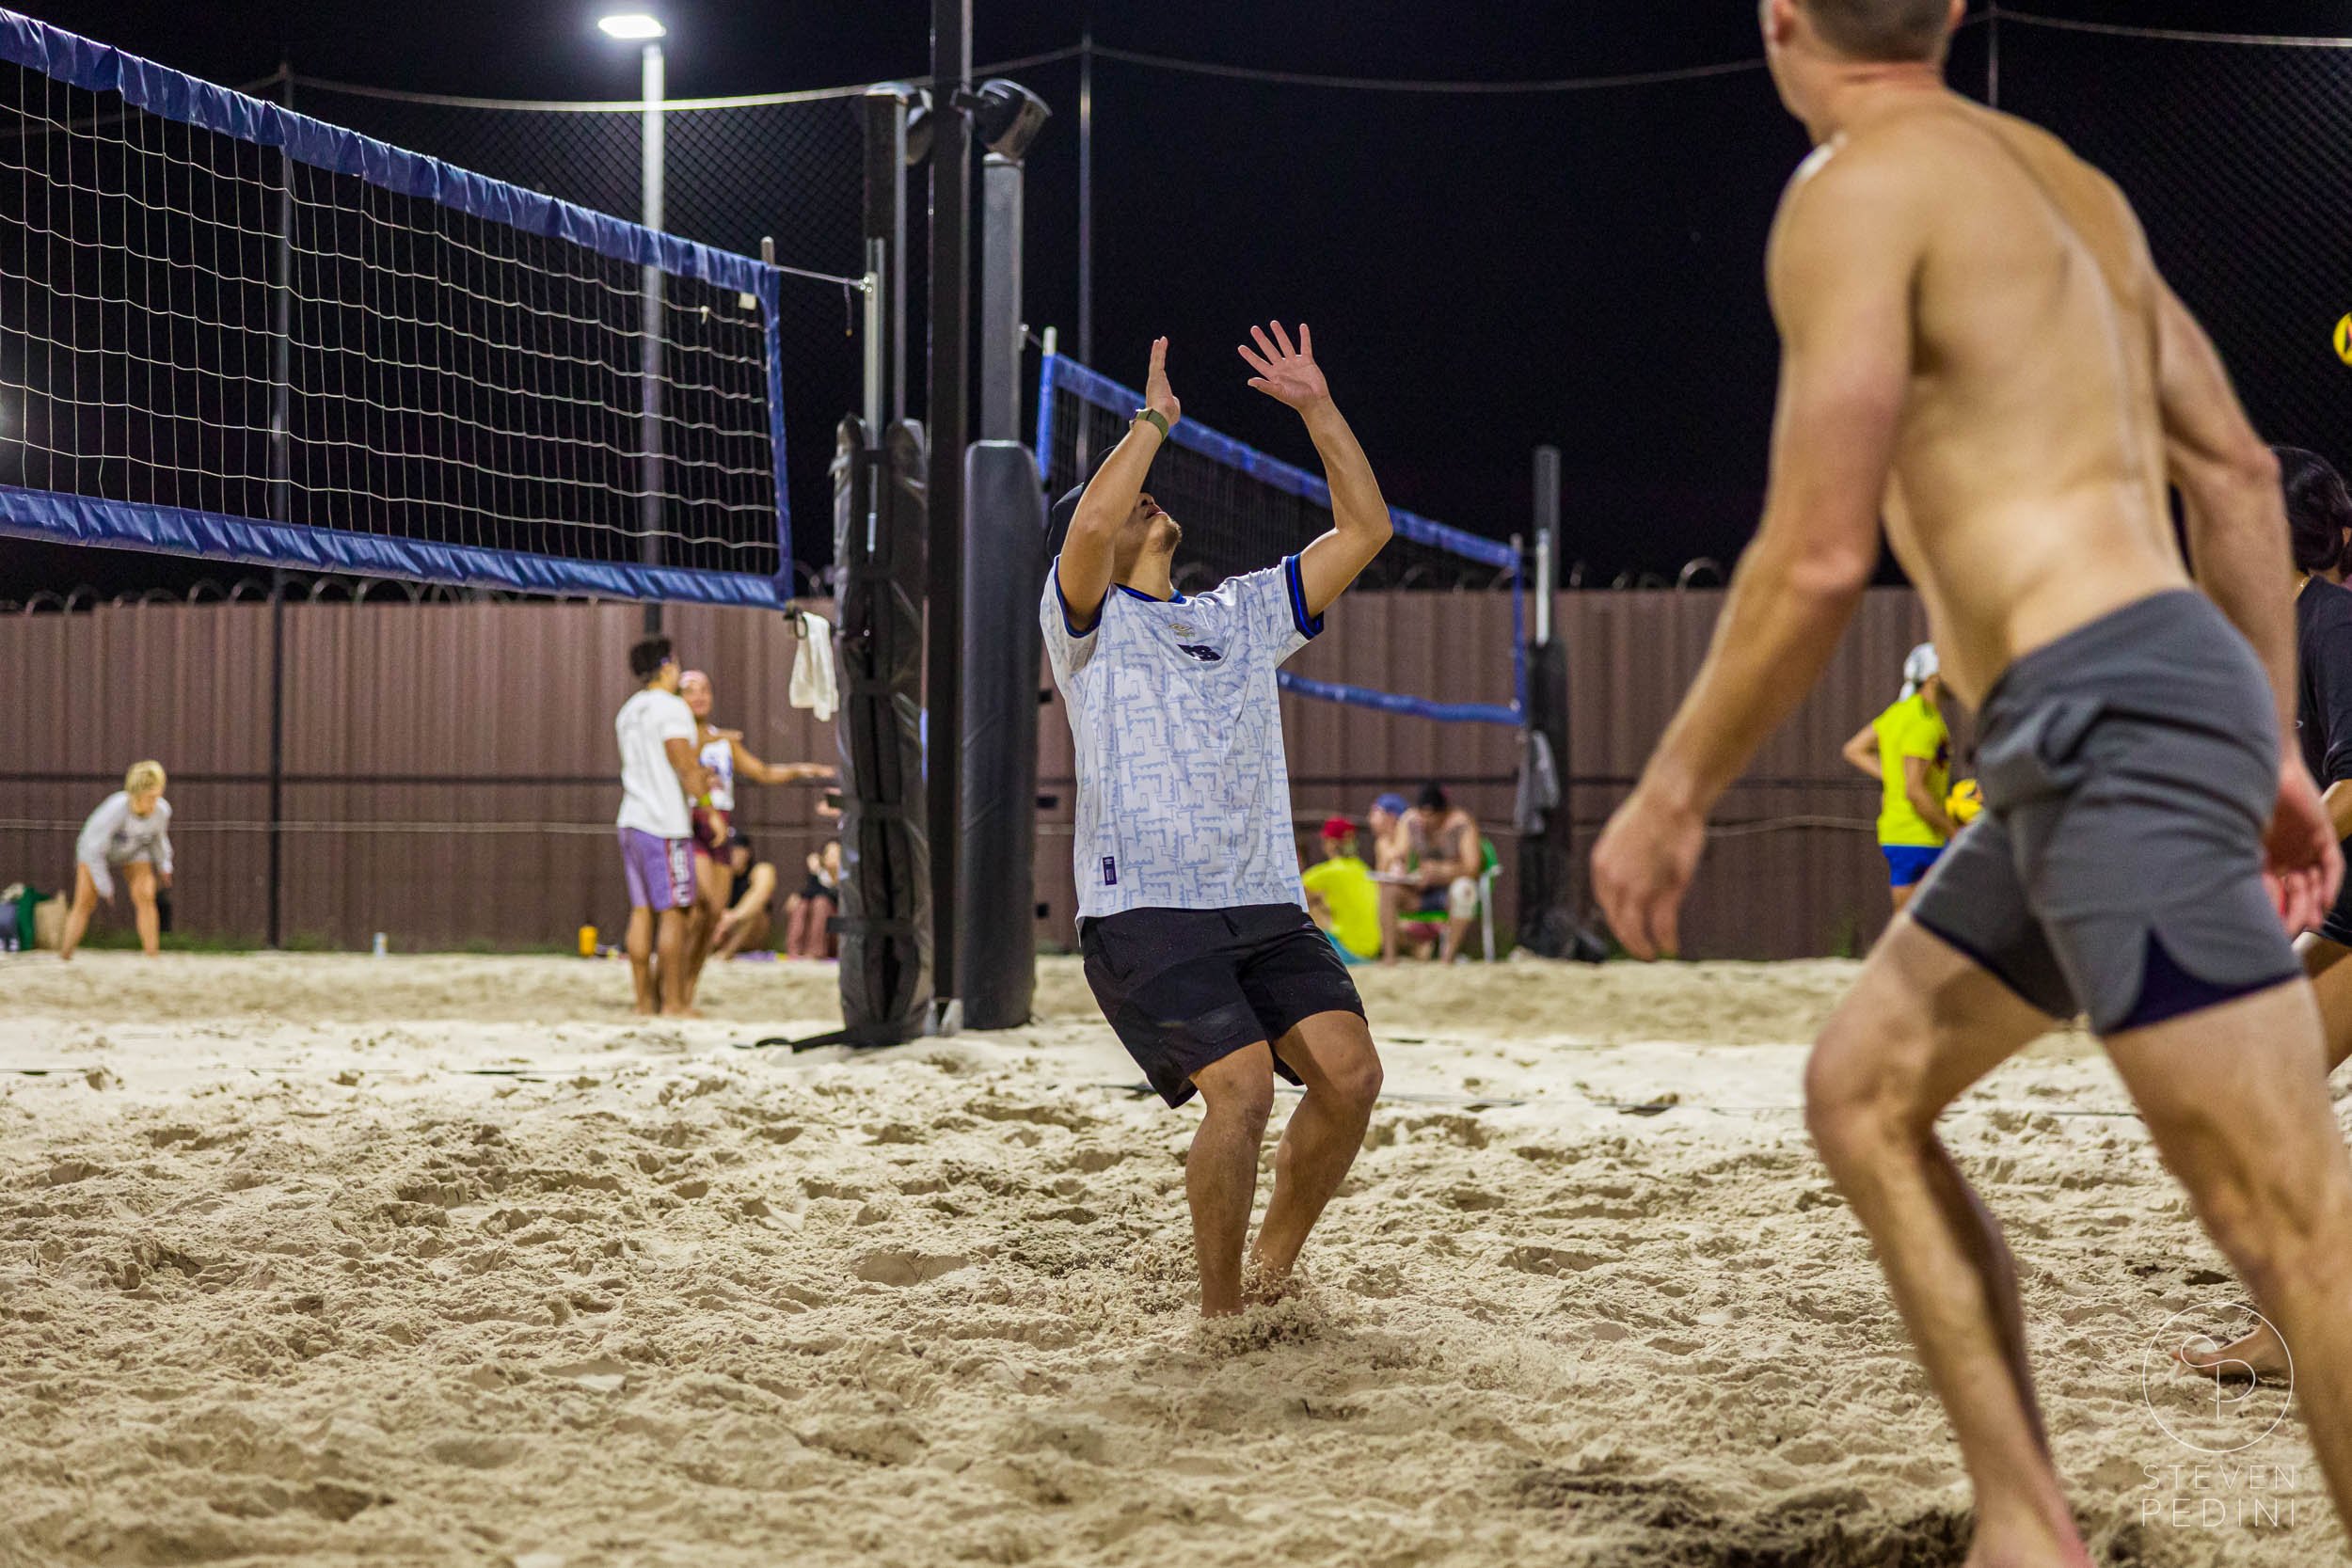 Steven Pedini Photography - Bumpy Pickle - Sand Volleyball - Houston TX - World Cup of Volleyball - 00403.jpg